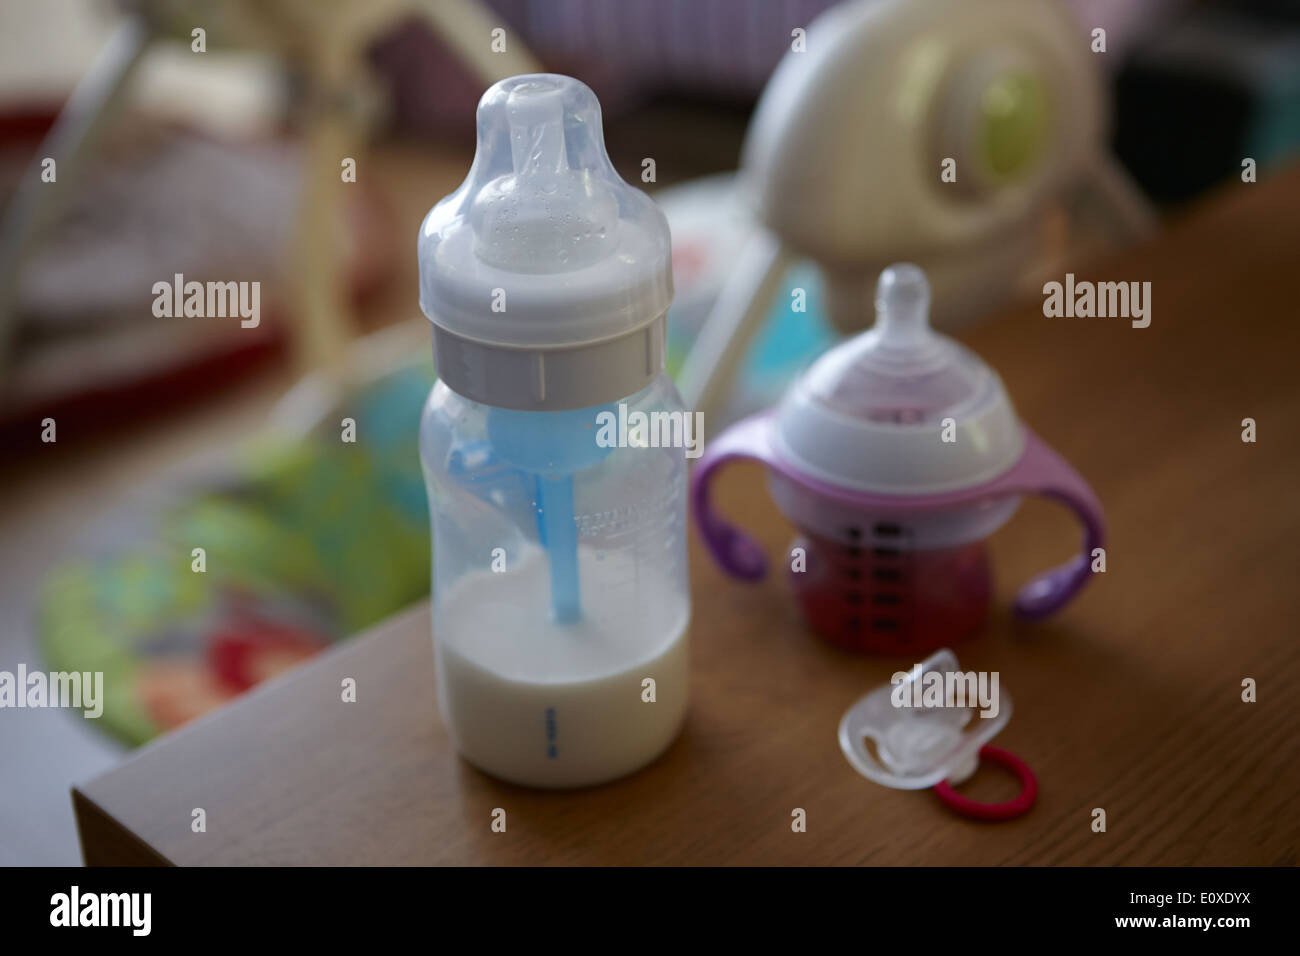 babys bottle drink cup and dummy Stock Photo